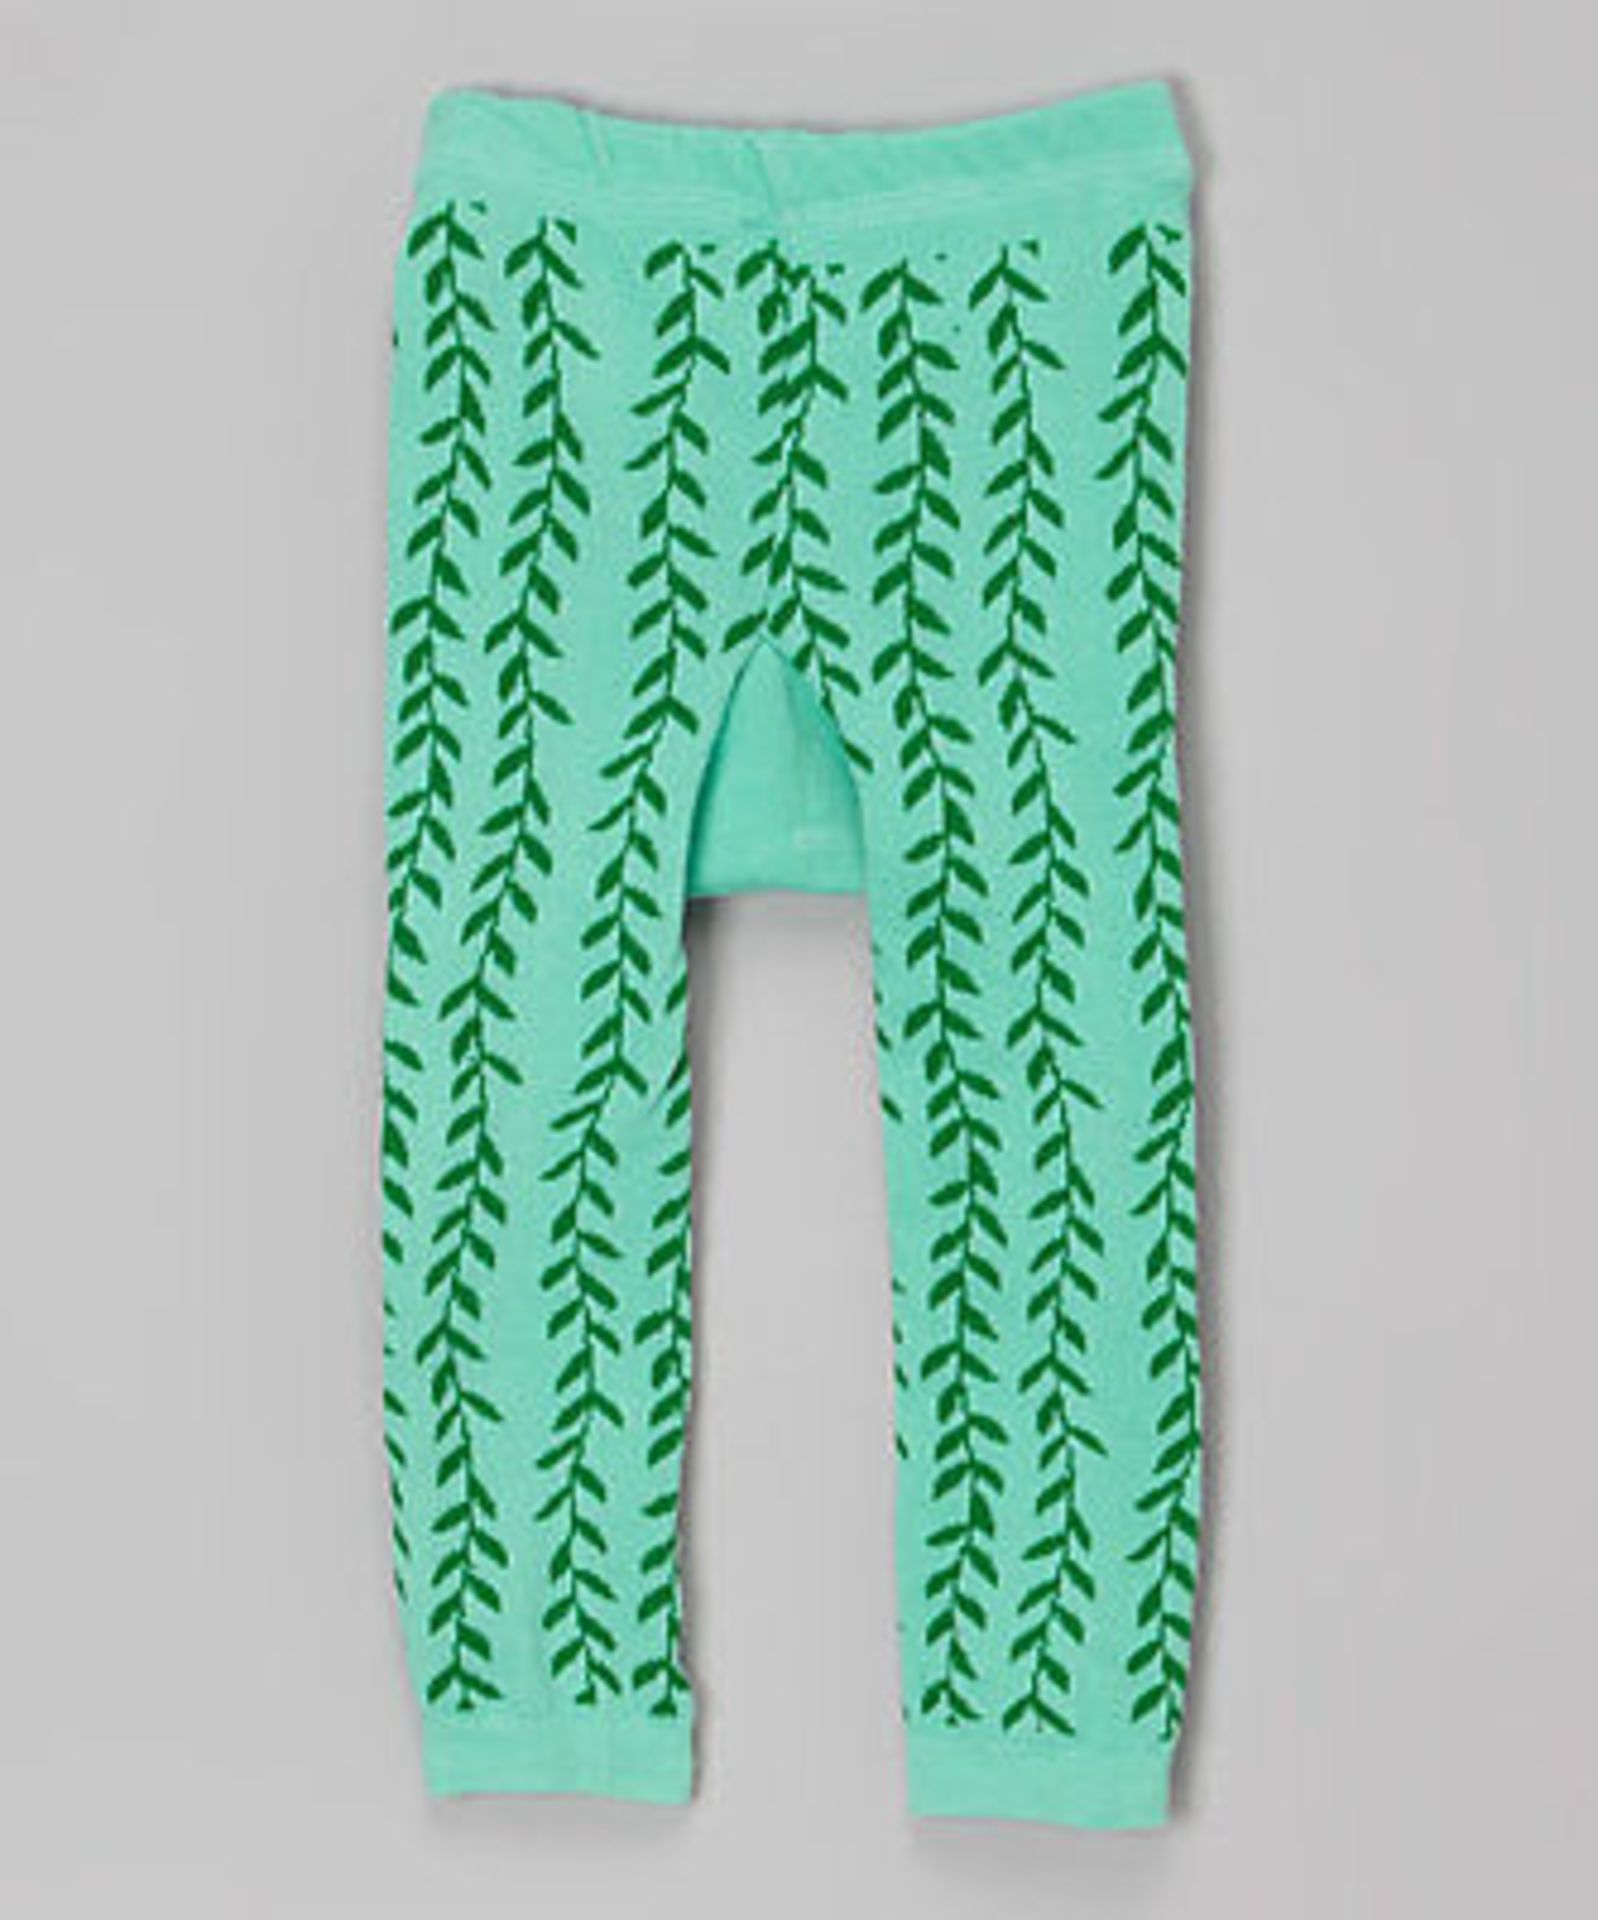 Doodle Pnats Green Sloth Leggings (18-24 Months) (New With Tags) [Ref: 265224731-] - Image 2 of 3